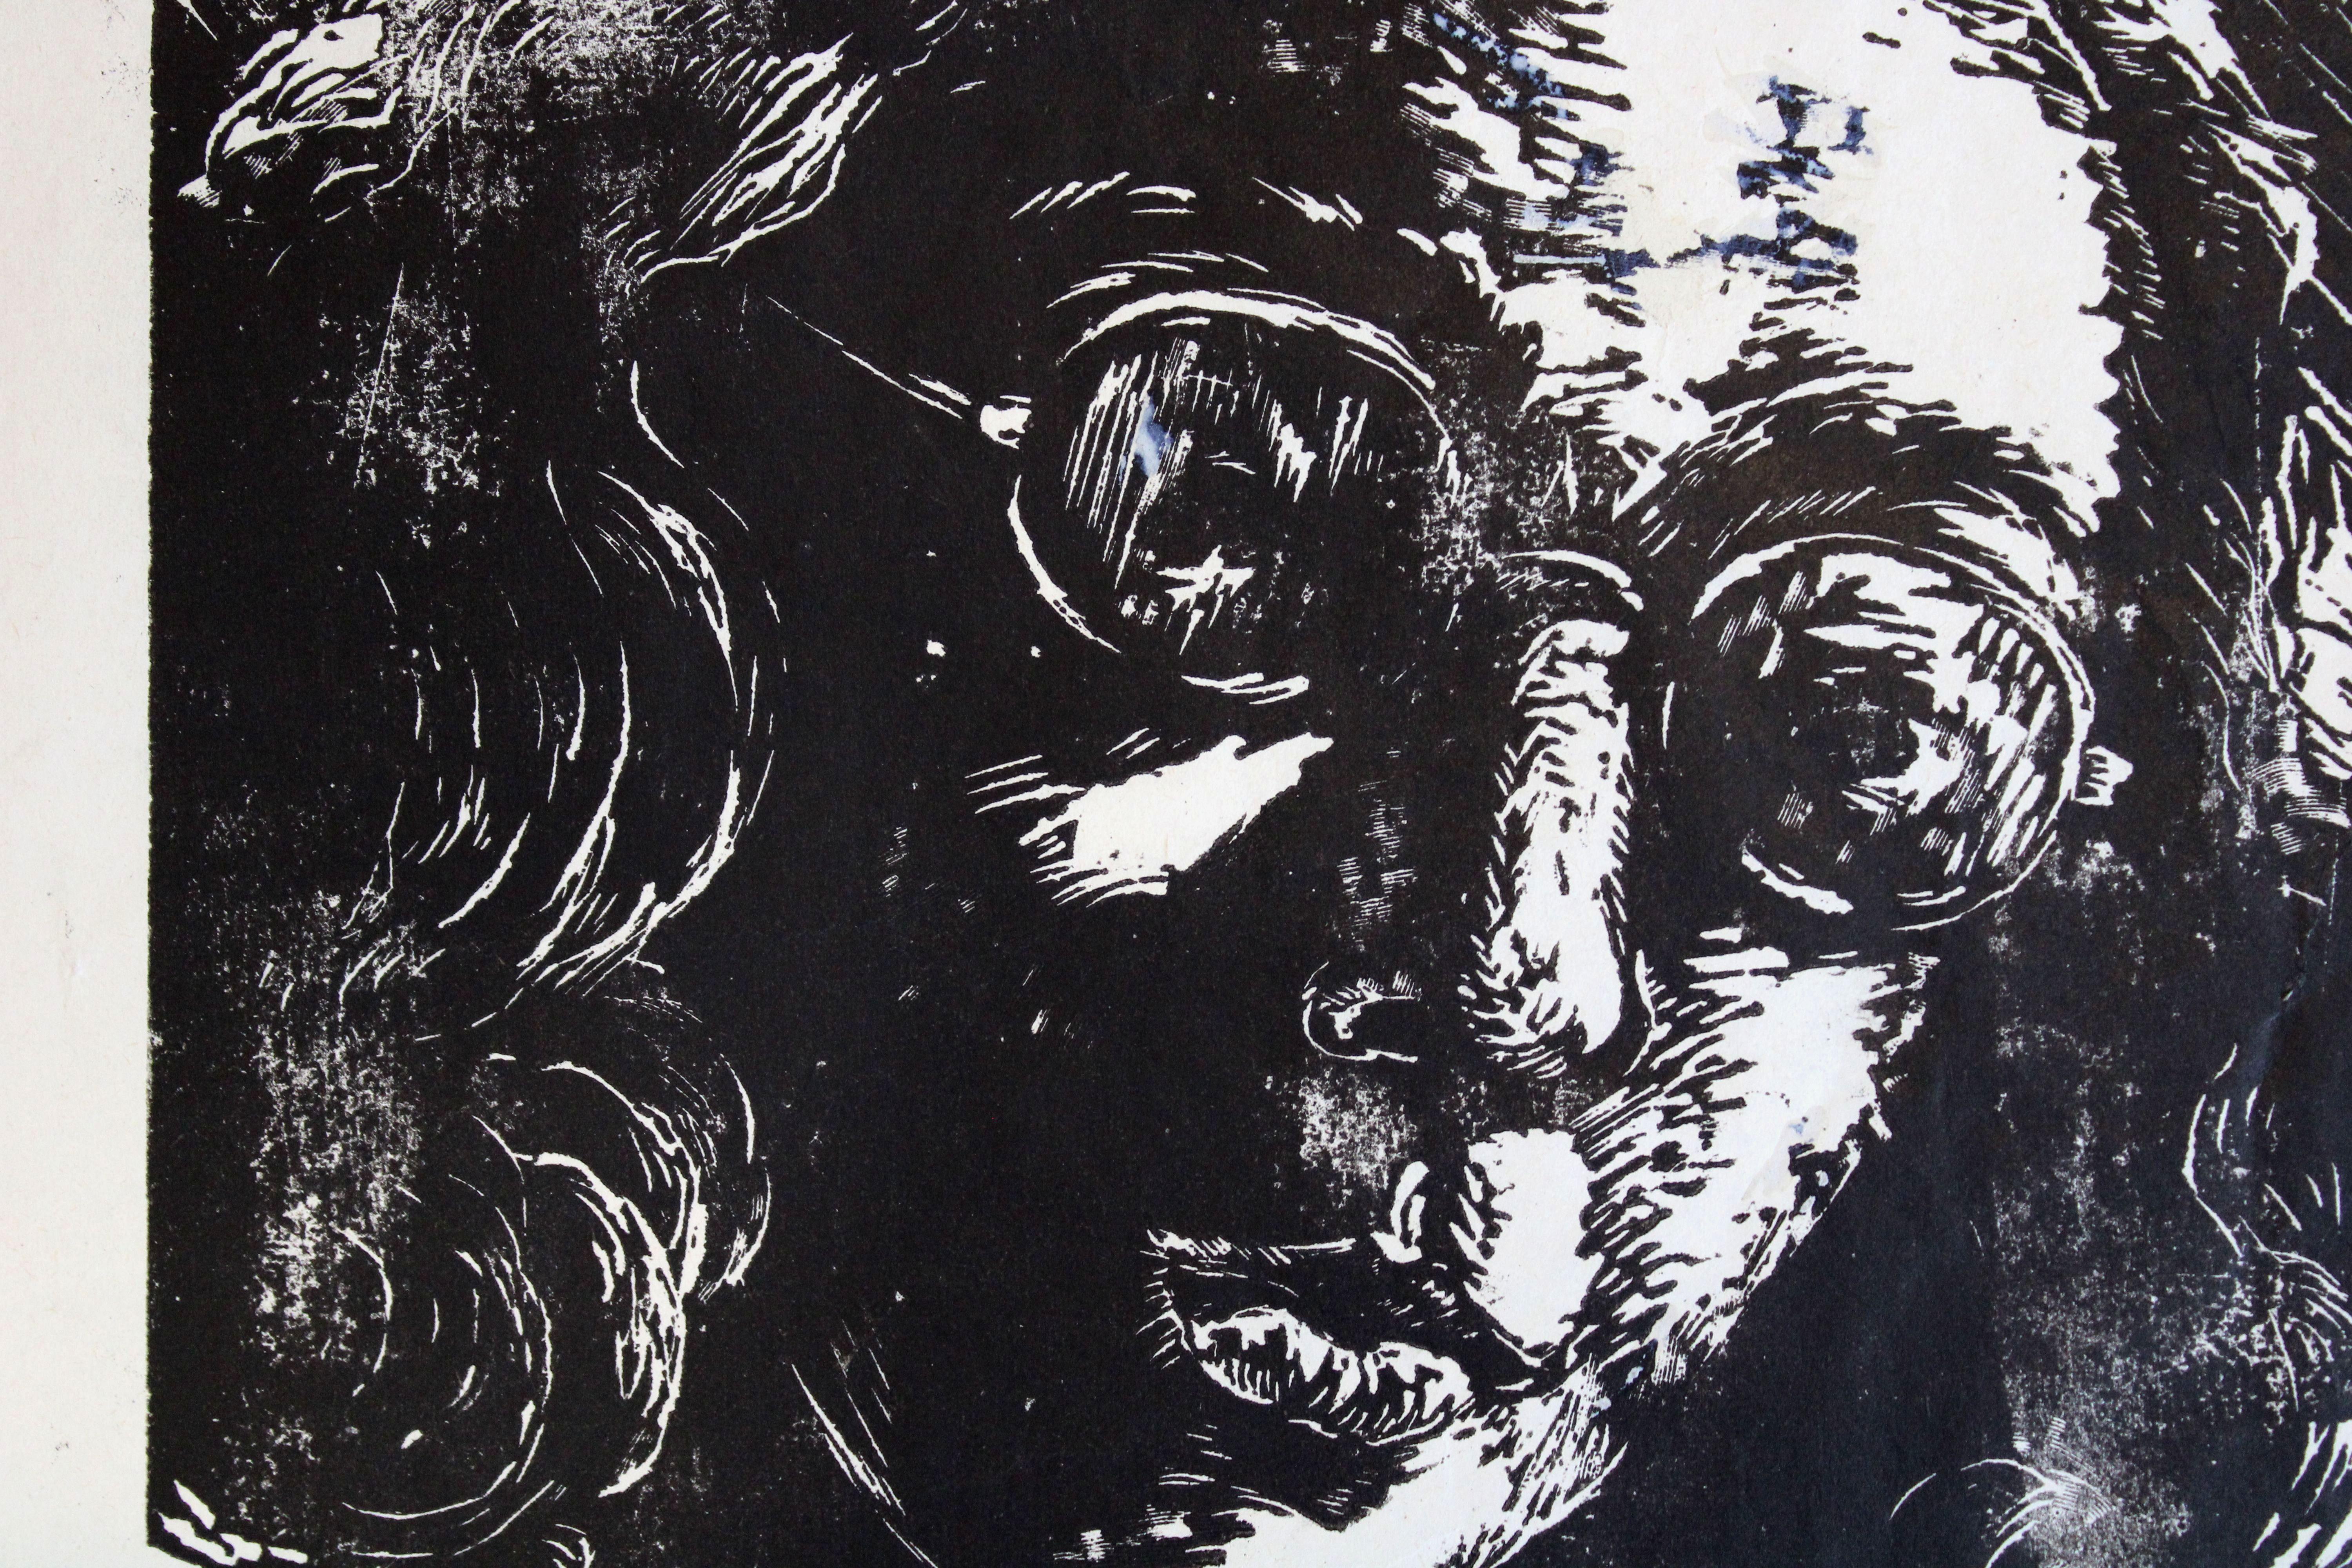 Self-portrait. Paper, linocut, 31x21.5 cm

Dzidra Ezergaile (1926-2013)
Born in Riga. School years alternate with summer work in the countryside. In 1947, she began her studies at the Faculty of Architecture of LVU, but in 1951 she transferred to